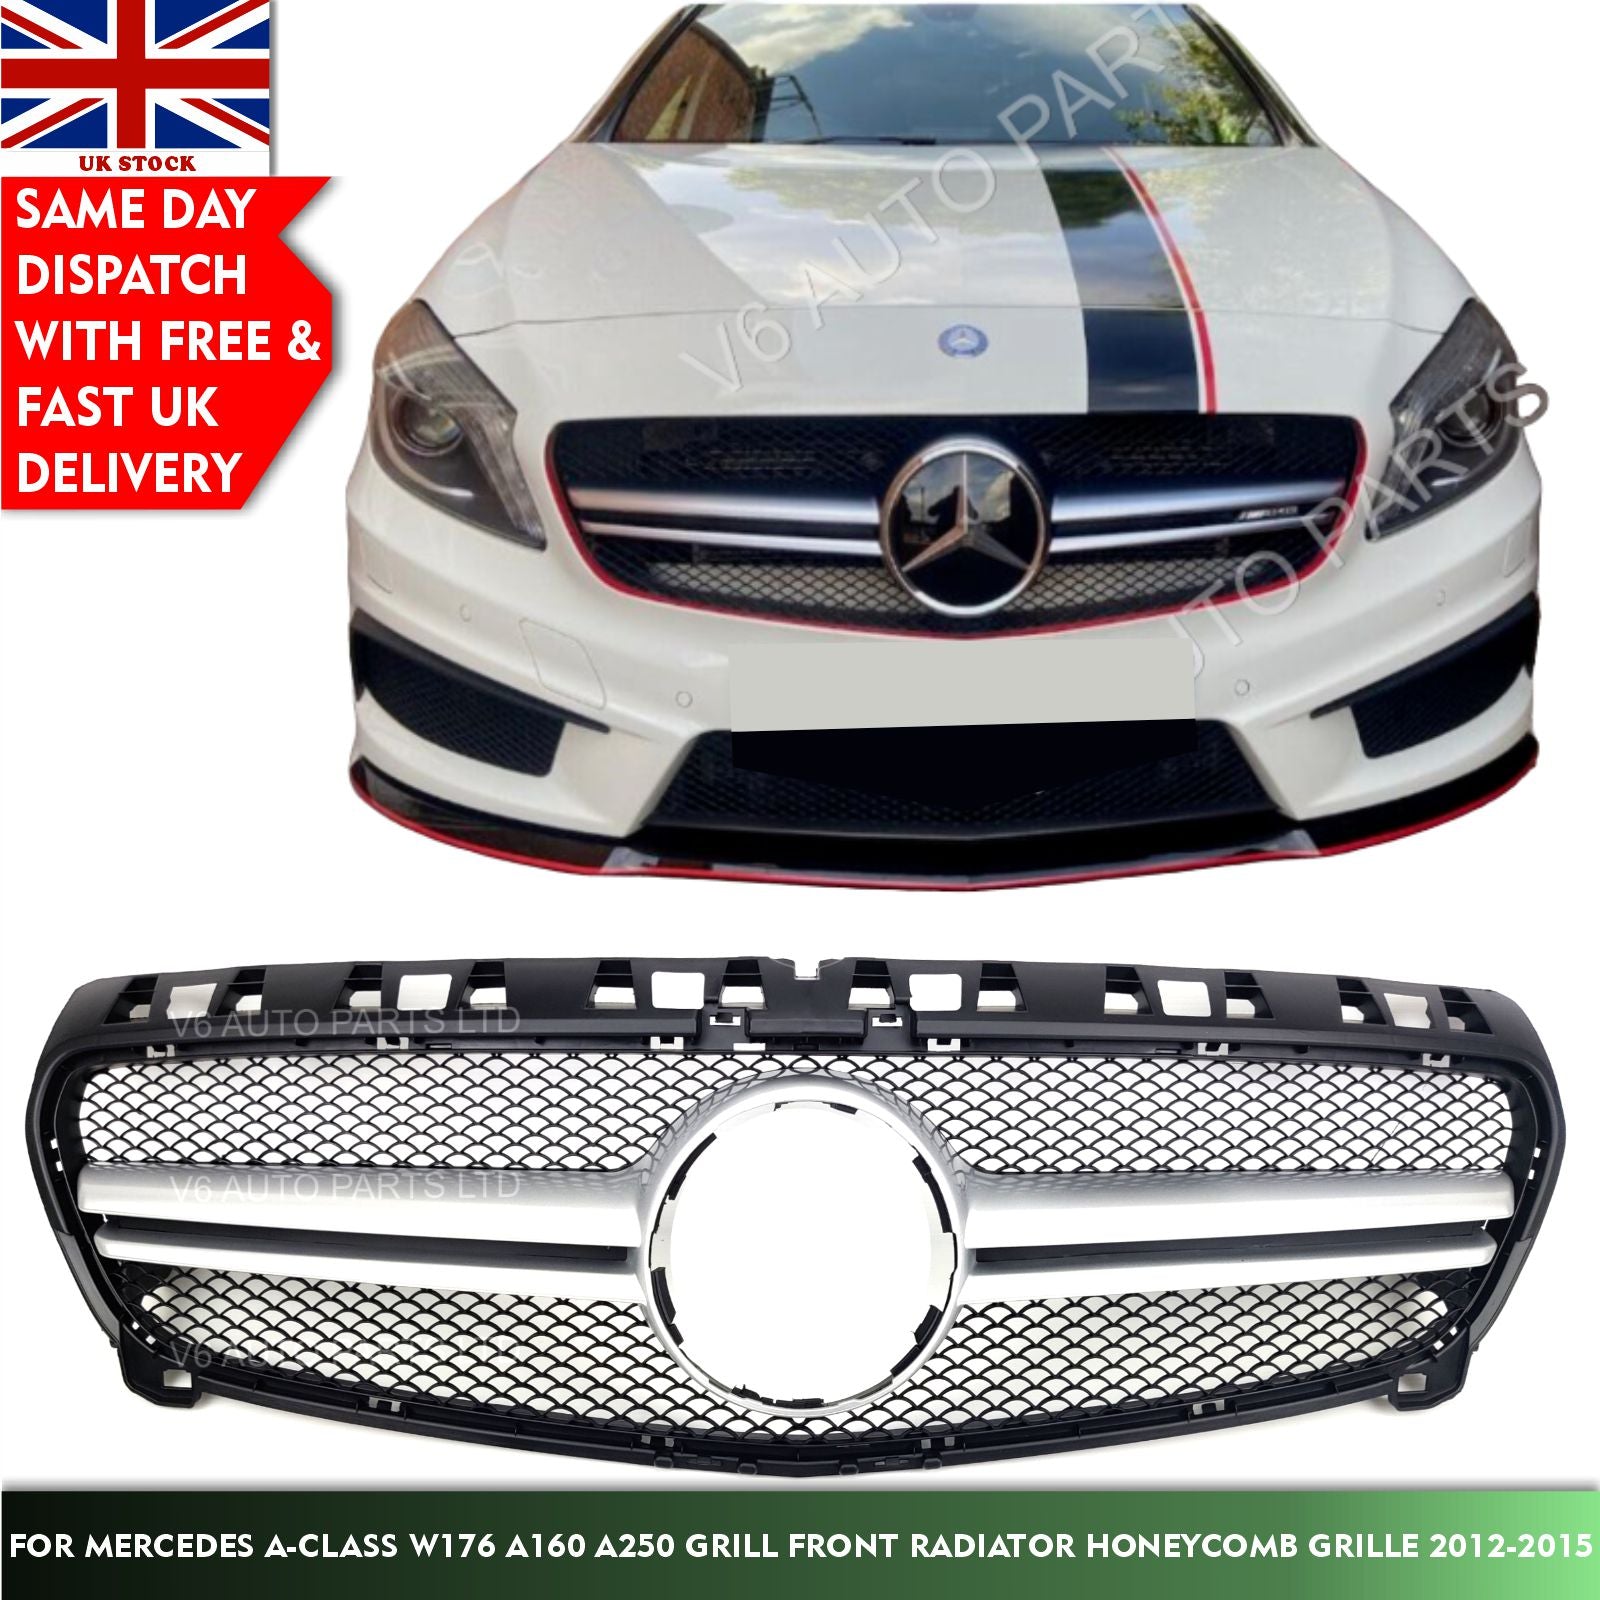 For Mercedes A-Class W176 A160 A250 Grill Front Radiator Honeycomb Grille 2012-2015